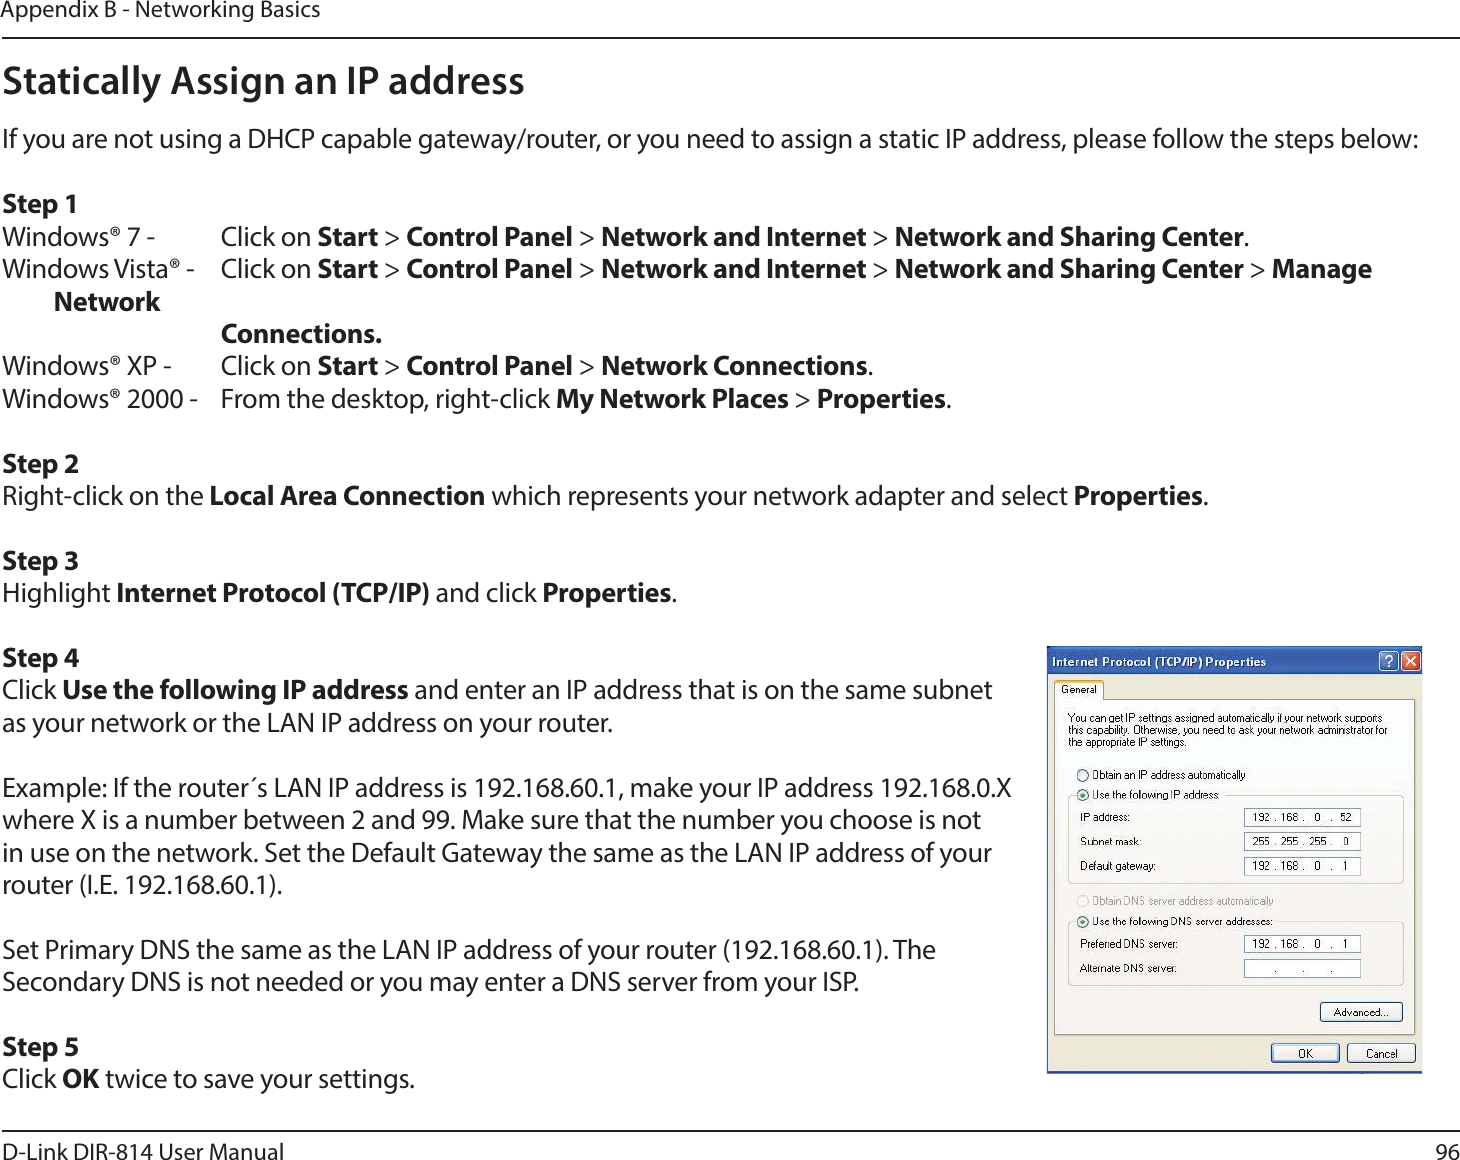 96D-Link DIR-814 User ManualAppendix B - Networking BasicsStatically Assign an IP addressIf you are not using a DHCP capable gateway/router, or you need to assign a static IP address, please follow the steps below:Step 1Windows® 7 -  Click on Start &gt; Control Panel &gt; Network and Internet &gt; Network and Sharing Center.Windows Vista® -  Click on Start &gt; Control Panel &gt; Network and Internet &gt; Network and Sharing Center &gt; Manage Network    Connections.Windows® XP -  Click on Start &gt; Control Panel &gt; Network Connections.Windows® 2000 -  From the desktop, right-click My Network Places &gt; Properties.Step 2Right-click on the Local Area Connection which represents your network adapter and select Properties.Step 3Highlight Internet Protocol (TCP/IP) and click Properties.Step 4Click Use the following IP address and enter an IP address that is on the same subnet as your network or the LAN IP address on your router. Example: If the router´s LAN IP address is 192.168.60.1, make your IP address 192.168.0.X where X is a number between 2 and 99. Make sure that the number you choose is not in use on the network. Set the Default Gateway the same as the LAN IP address of your router (I.E. 192.168.60.1). Set Primary DNS the same as the LAN IP address of your router (192.168.60.1). The Secondary DNS is not needed or you may enter a DNS server from your ISP.Step 5Click OK twice to save your settings.